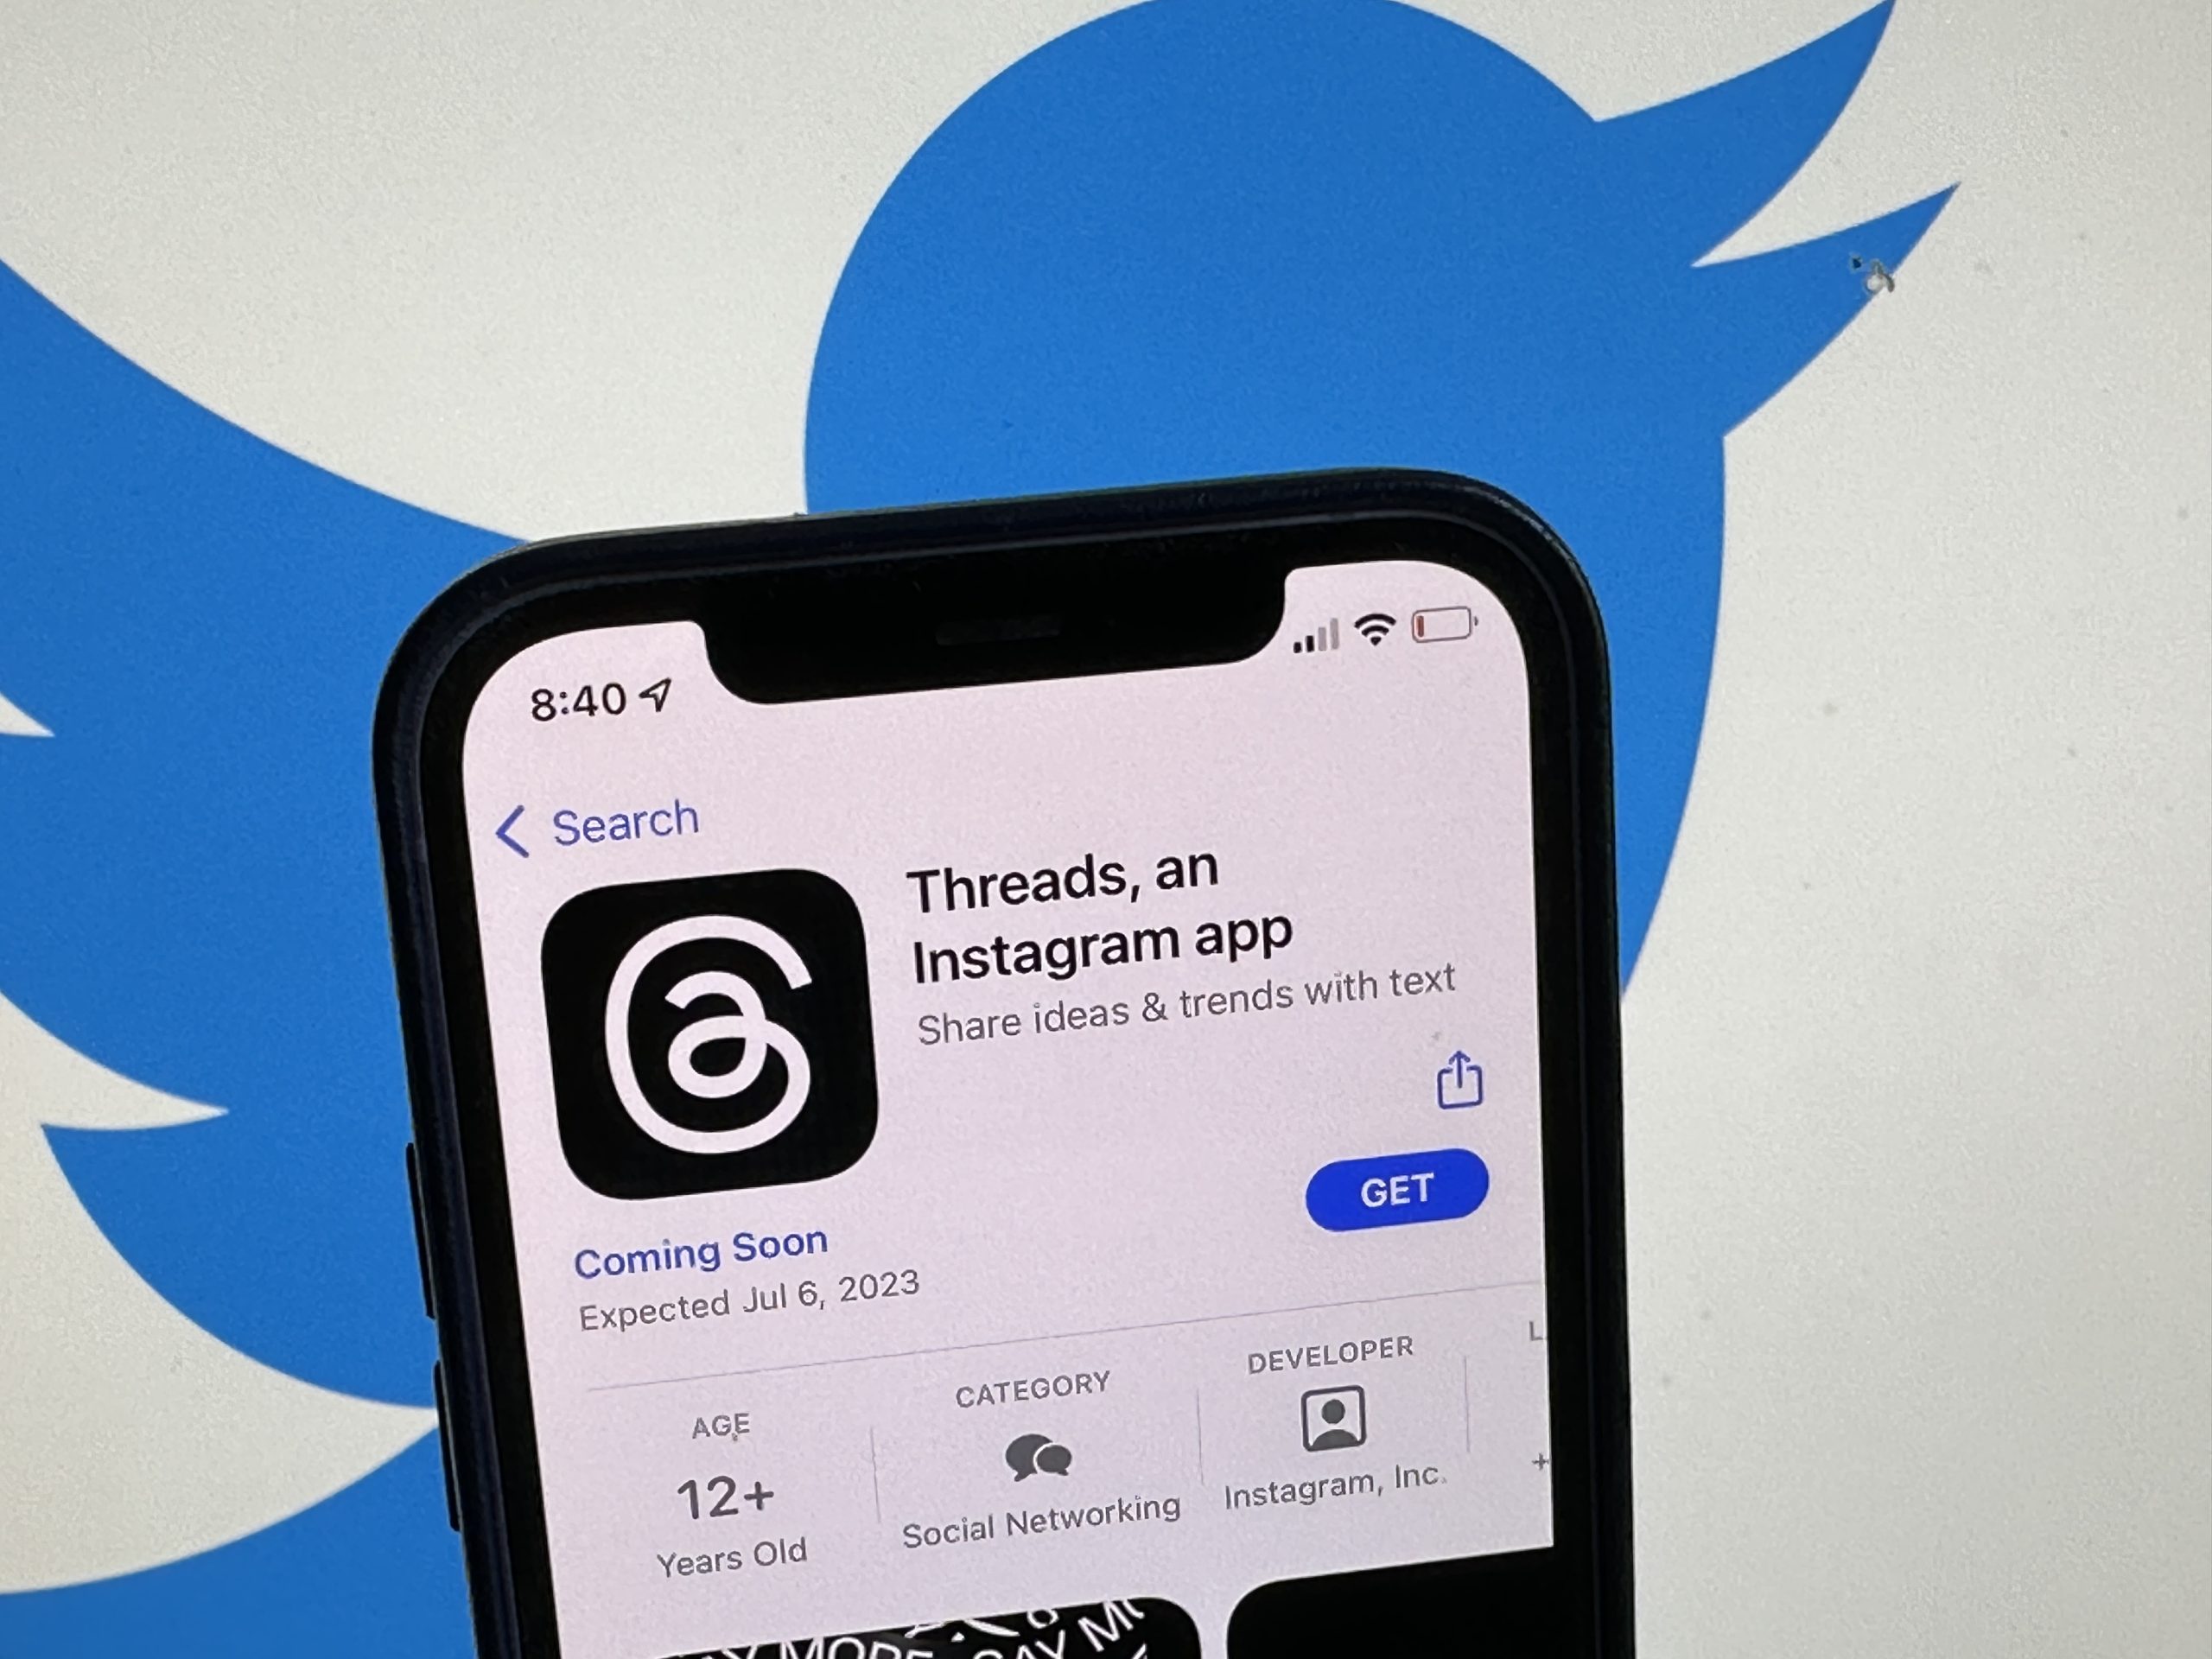 Facebook owner Meta to launch Twitter-like ‘Threads’ app